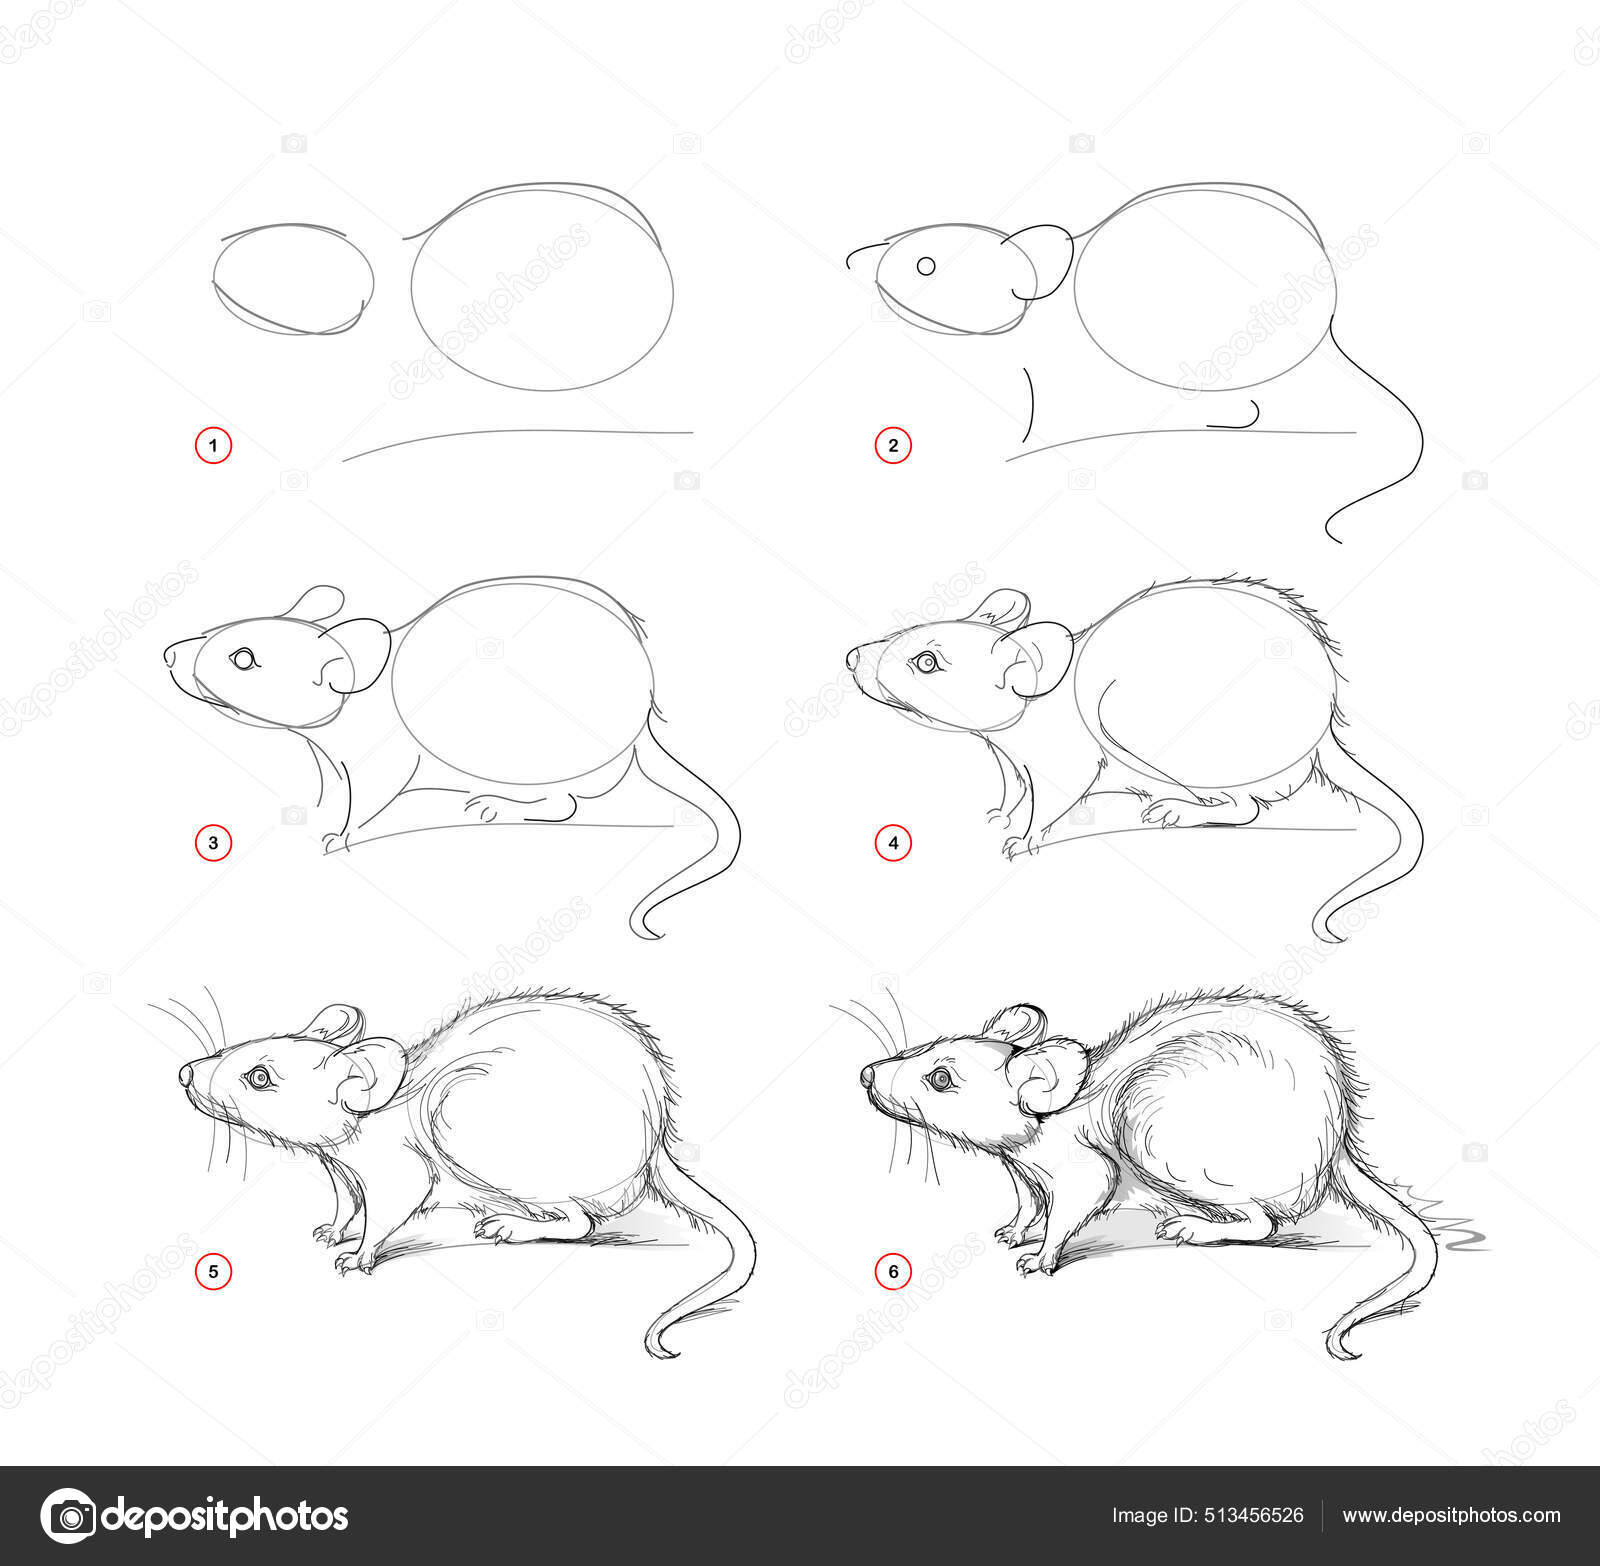 How To Draw A Mouse For Kids, Step by Step, Drawing Guide, by Dawn -  DragoArt